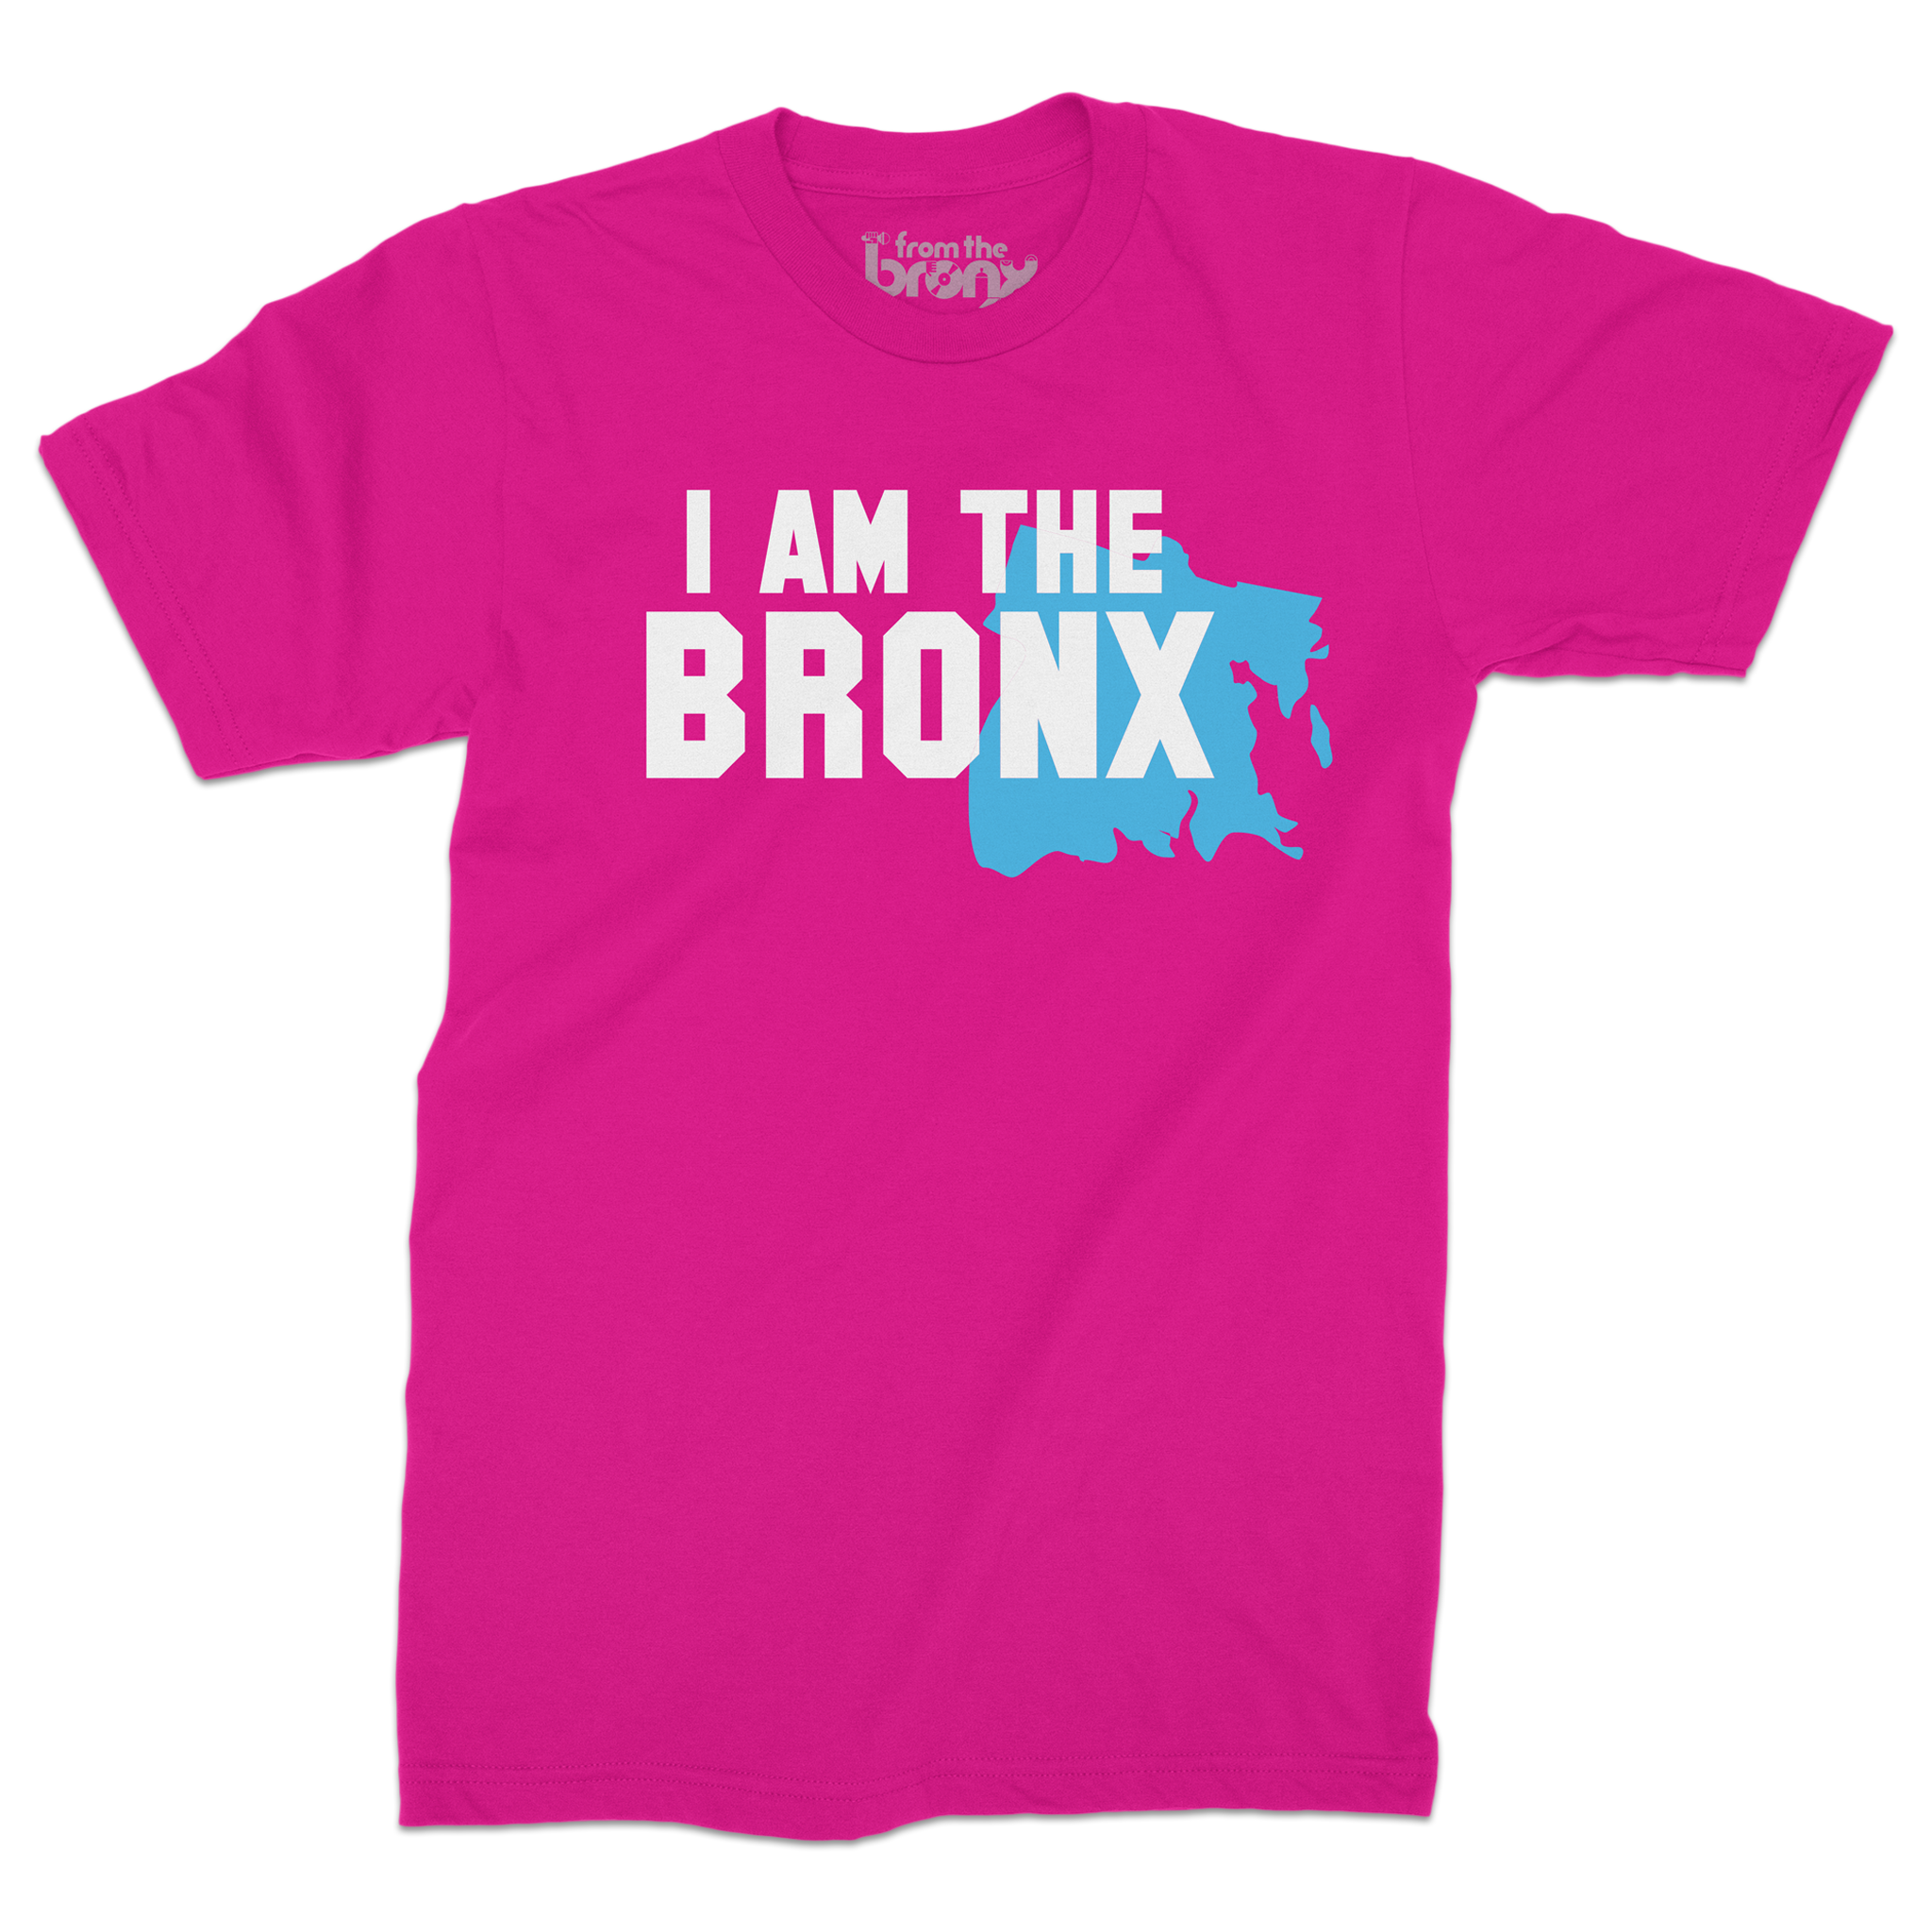 I AM THE BRONX T-Shirt Front in Magenta